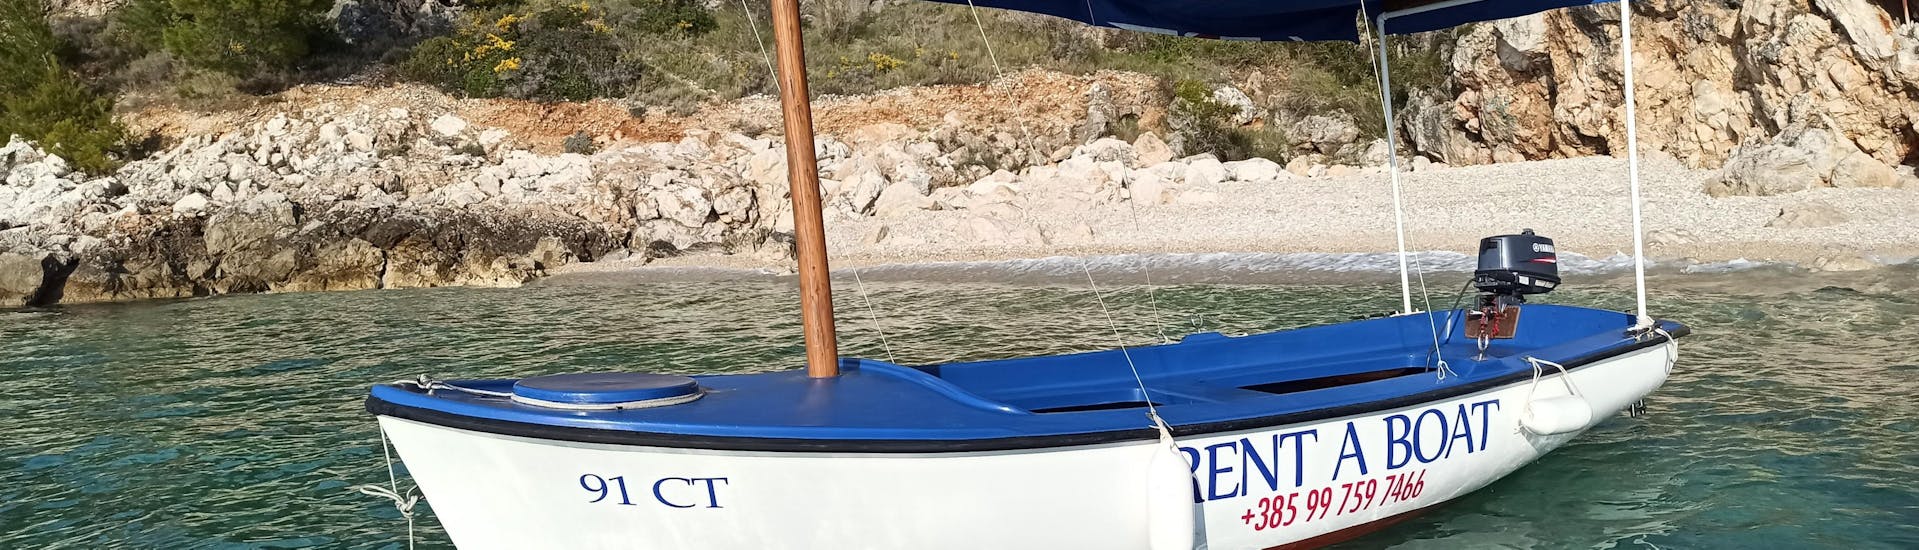 Side perspective of a Elan Pasara 490 boat from Cavtat Rent a boat, anchored in clear blue waters.